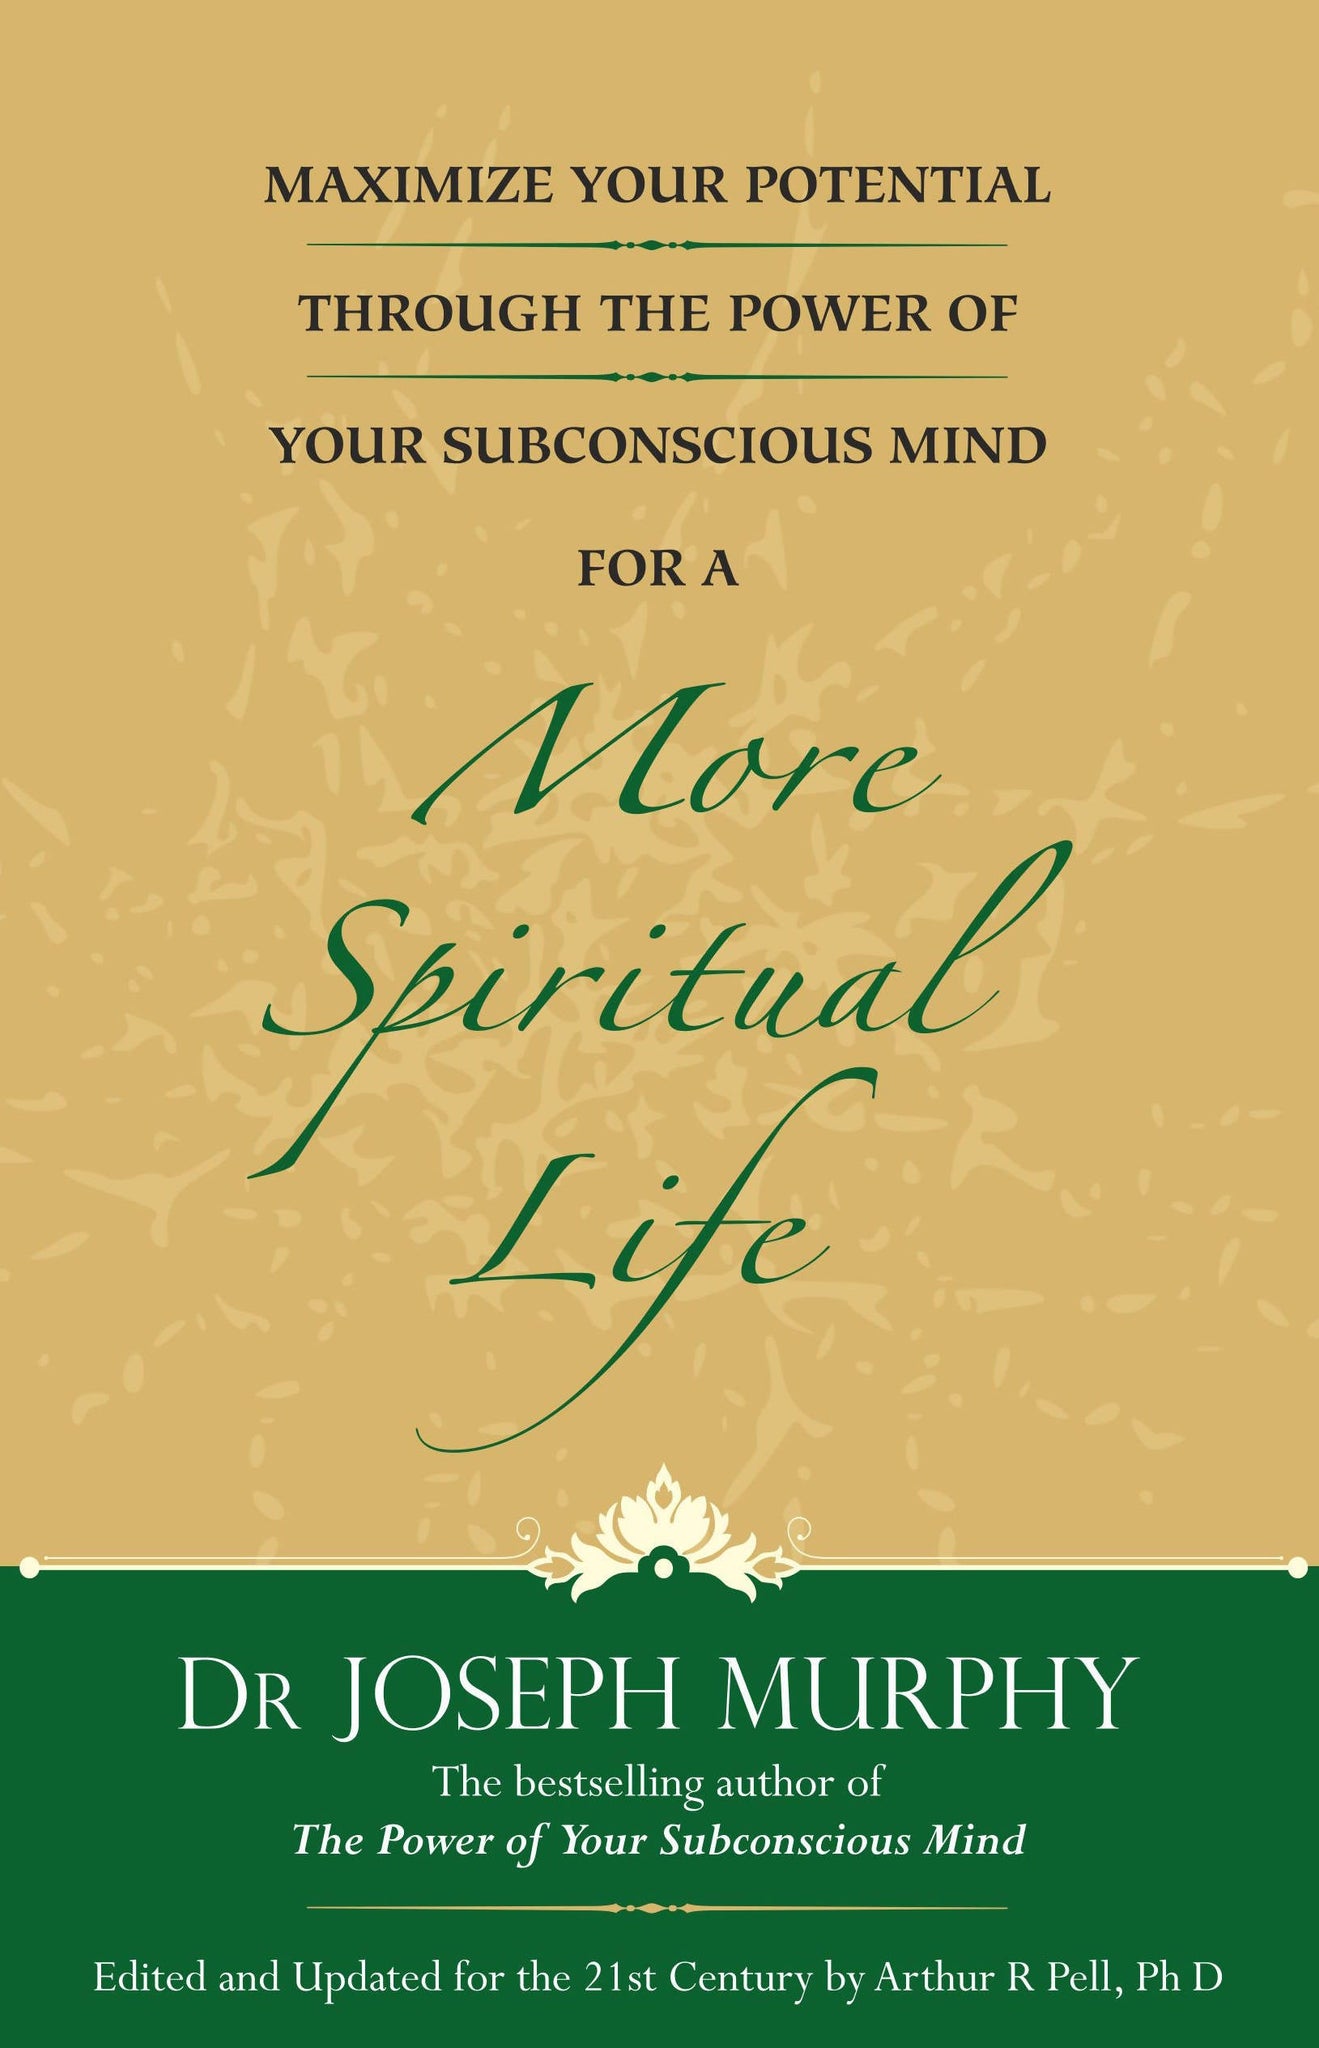 Maximize Your Potential Through The Power Of Your Subconscious Mind For A More Spiritual Life